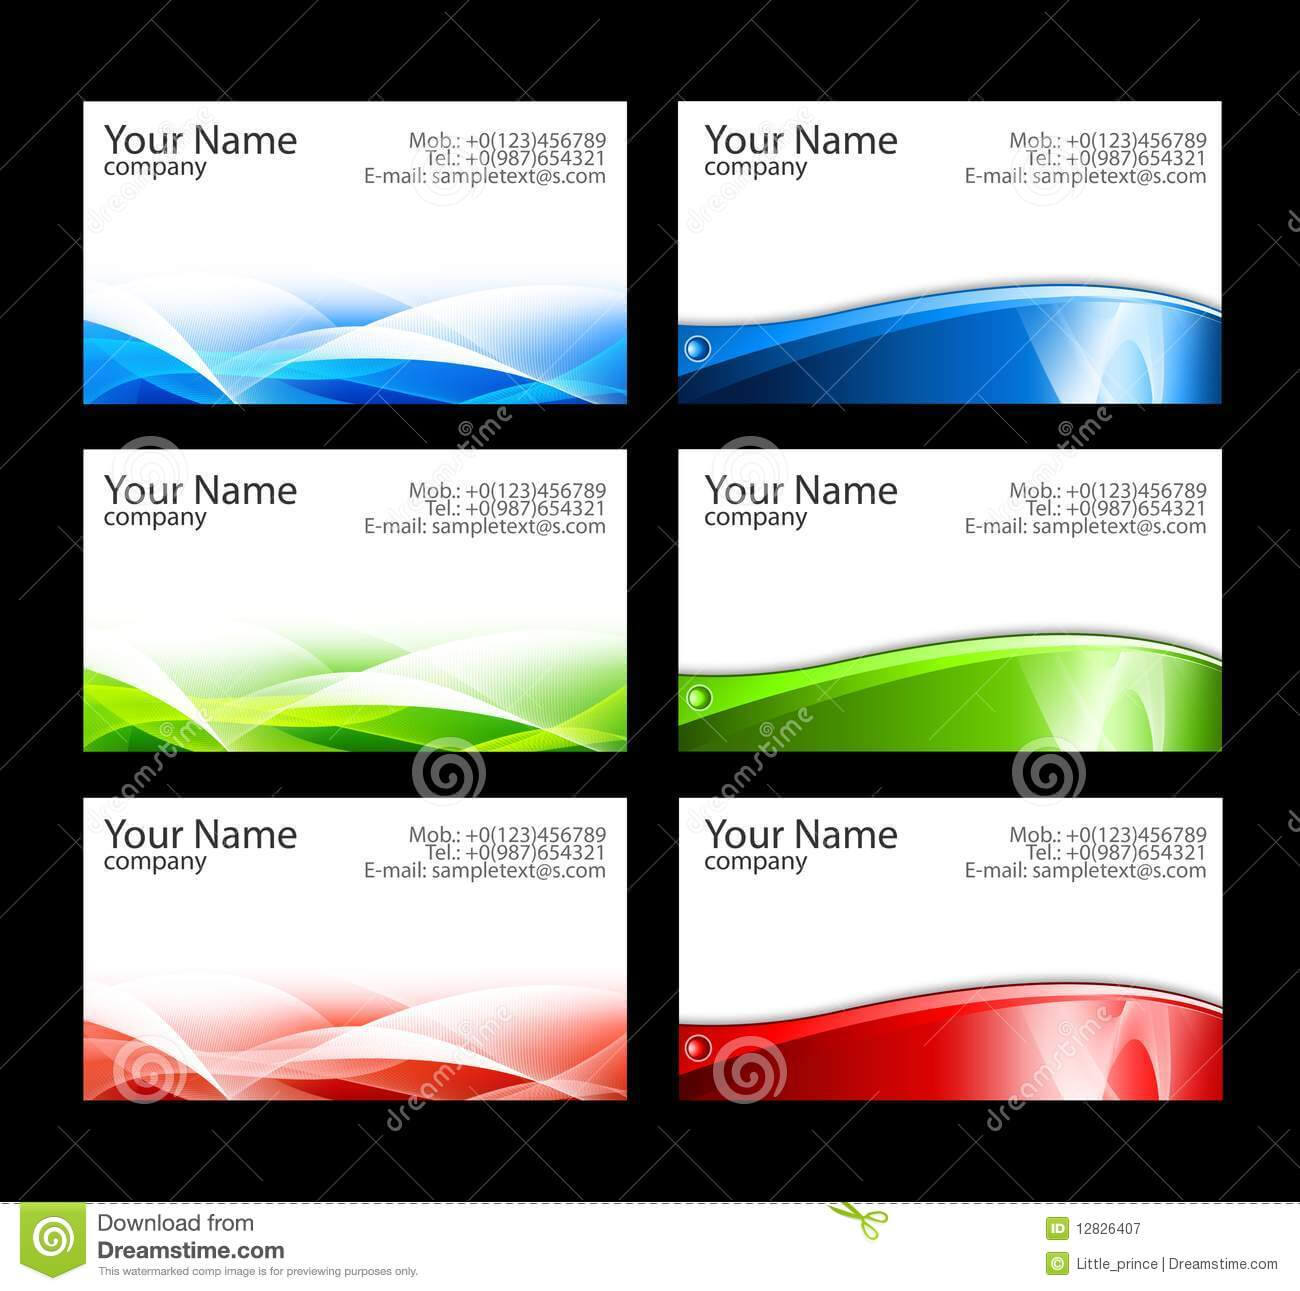 Microsoft Word Business Card Template Free Download – Yatay Throughout Calling Card Free Template